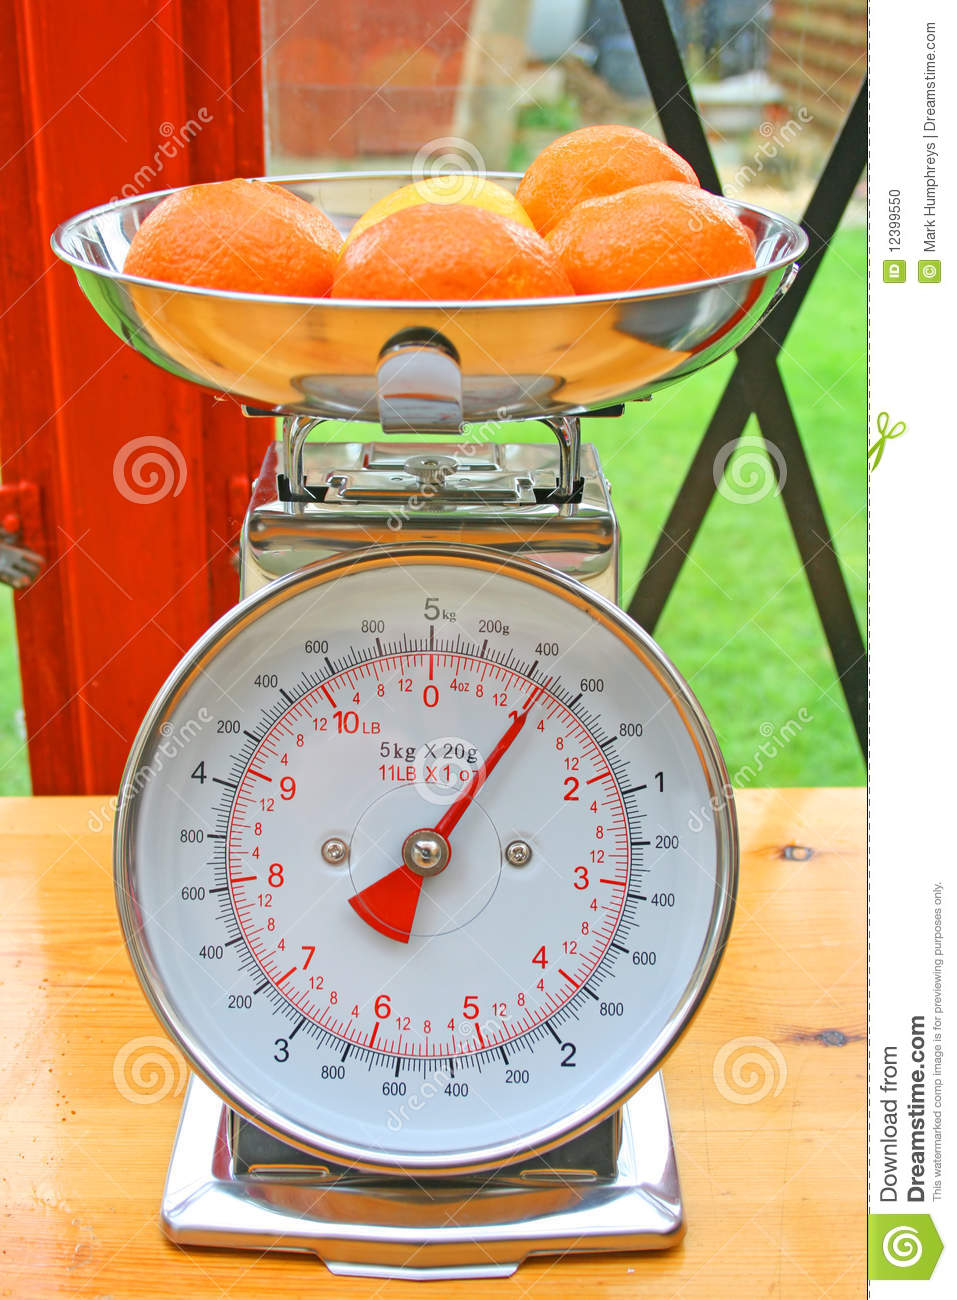 Kitchen Scales With Oranges And A Lemon In The Weighing Bowl On A